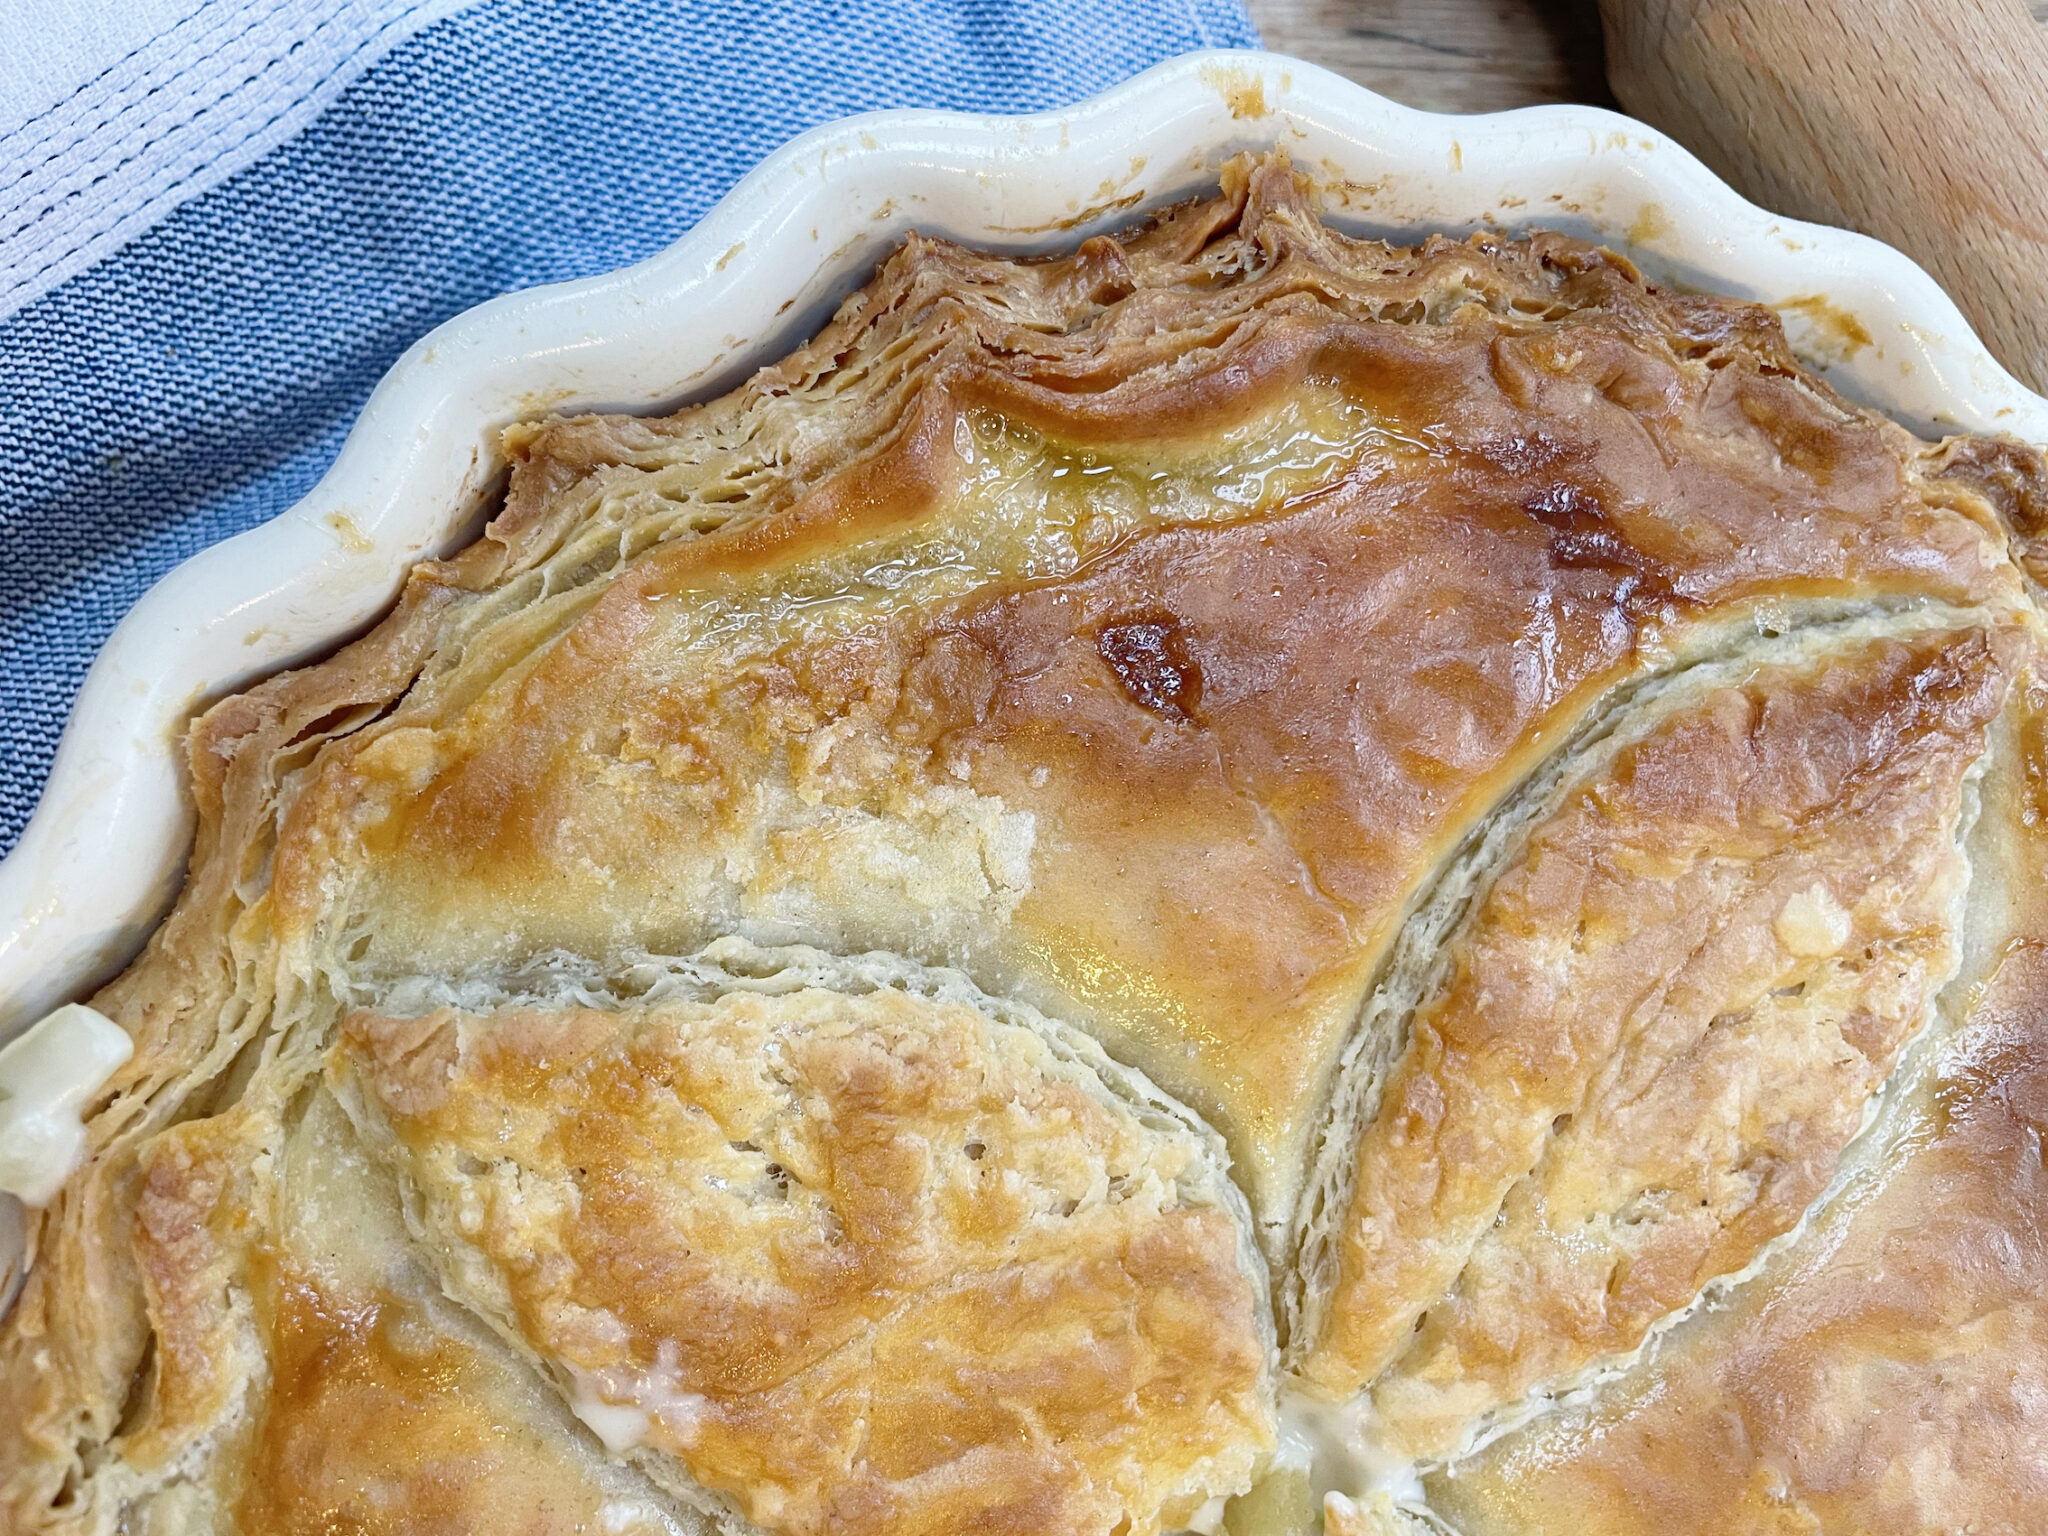 leek, mushroom and spinach pie with a cheesy sauce - Dom in the Kitchen